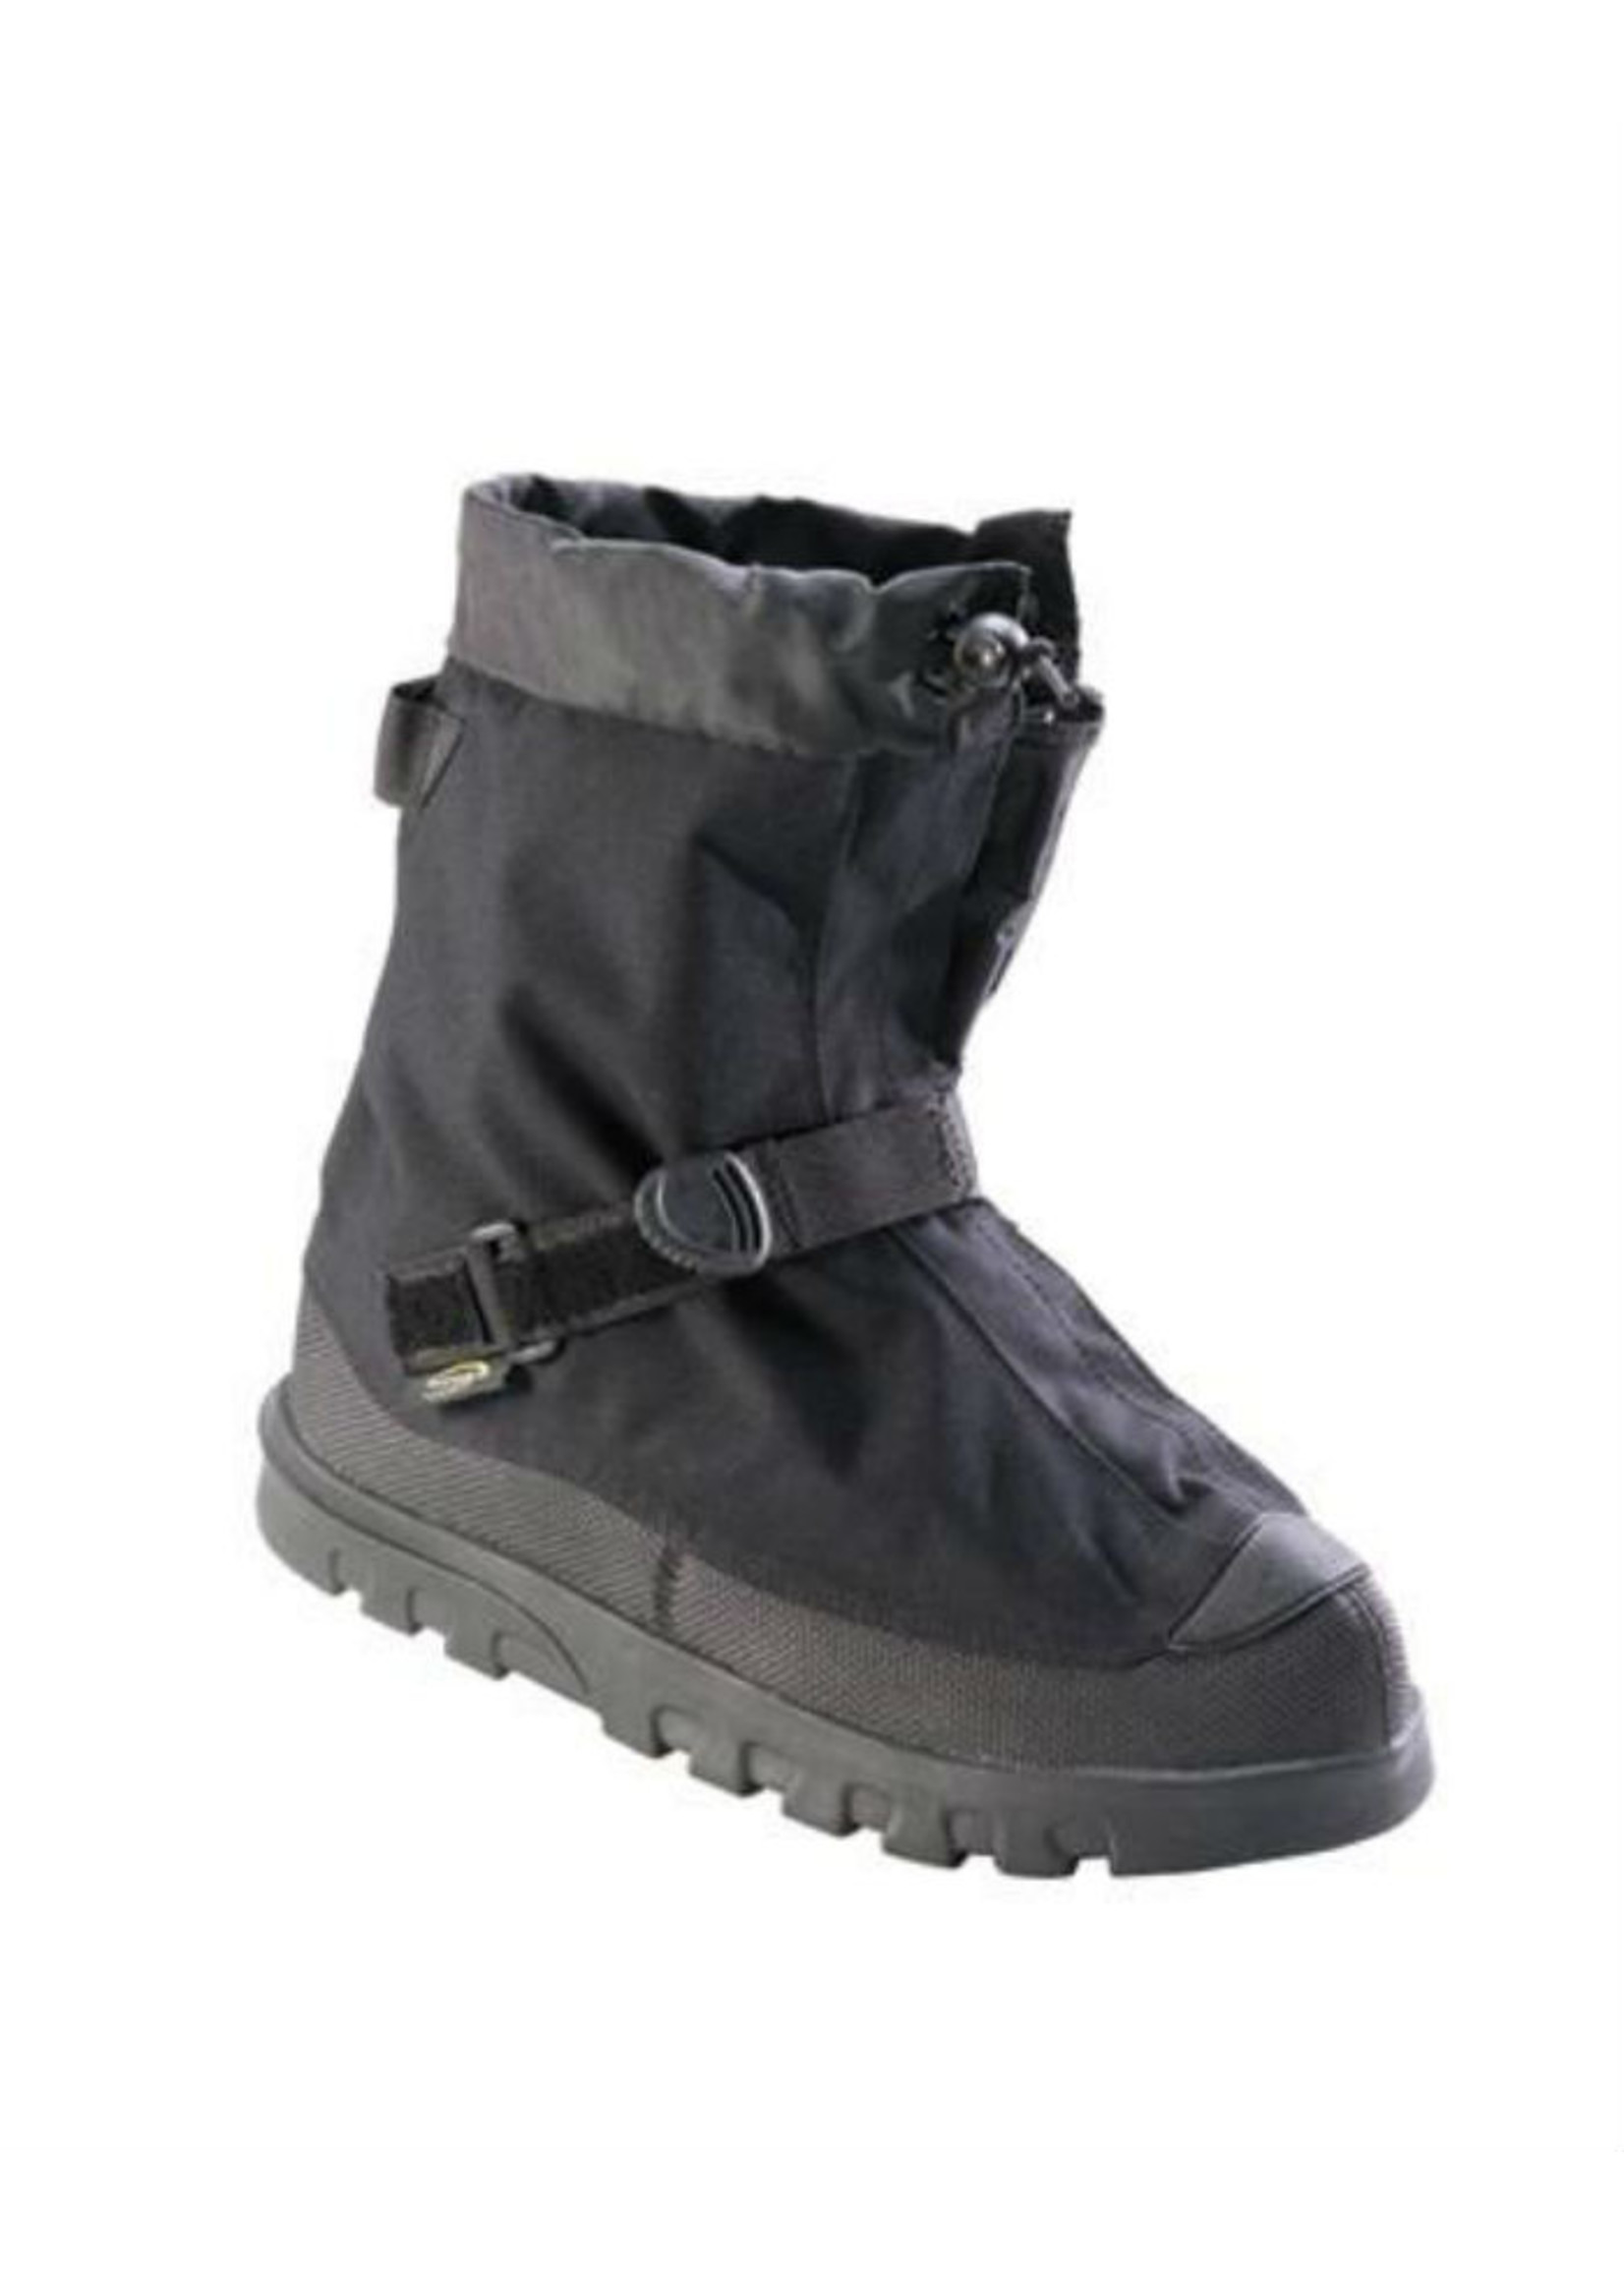 NEOS Couvre-bottes NEOS Voyager